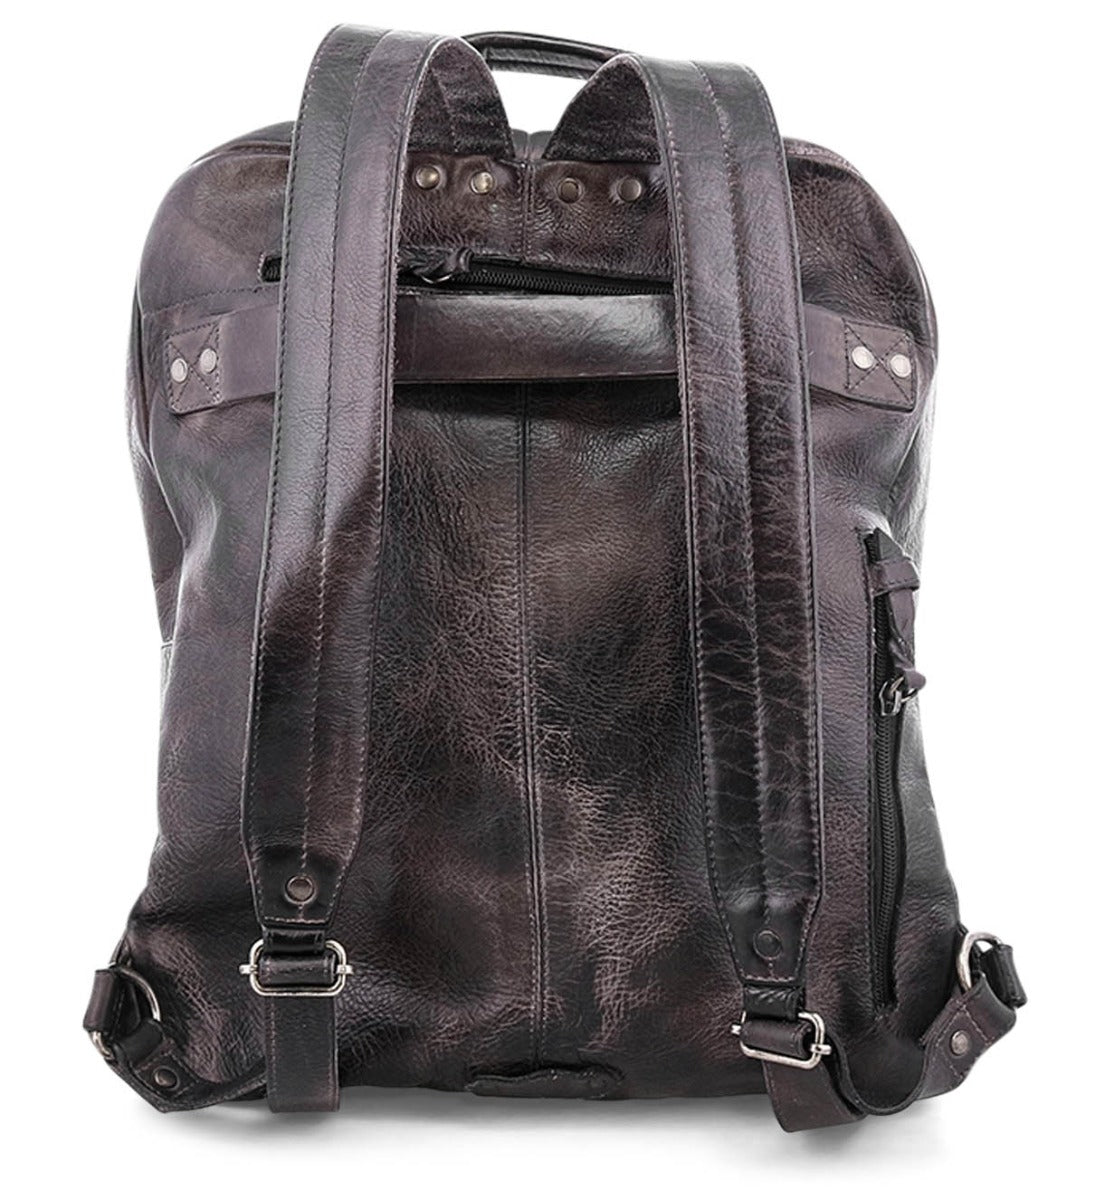 A black leather Lafe backpack with straps and rivets, by Bed Stu.